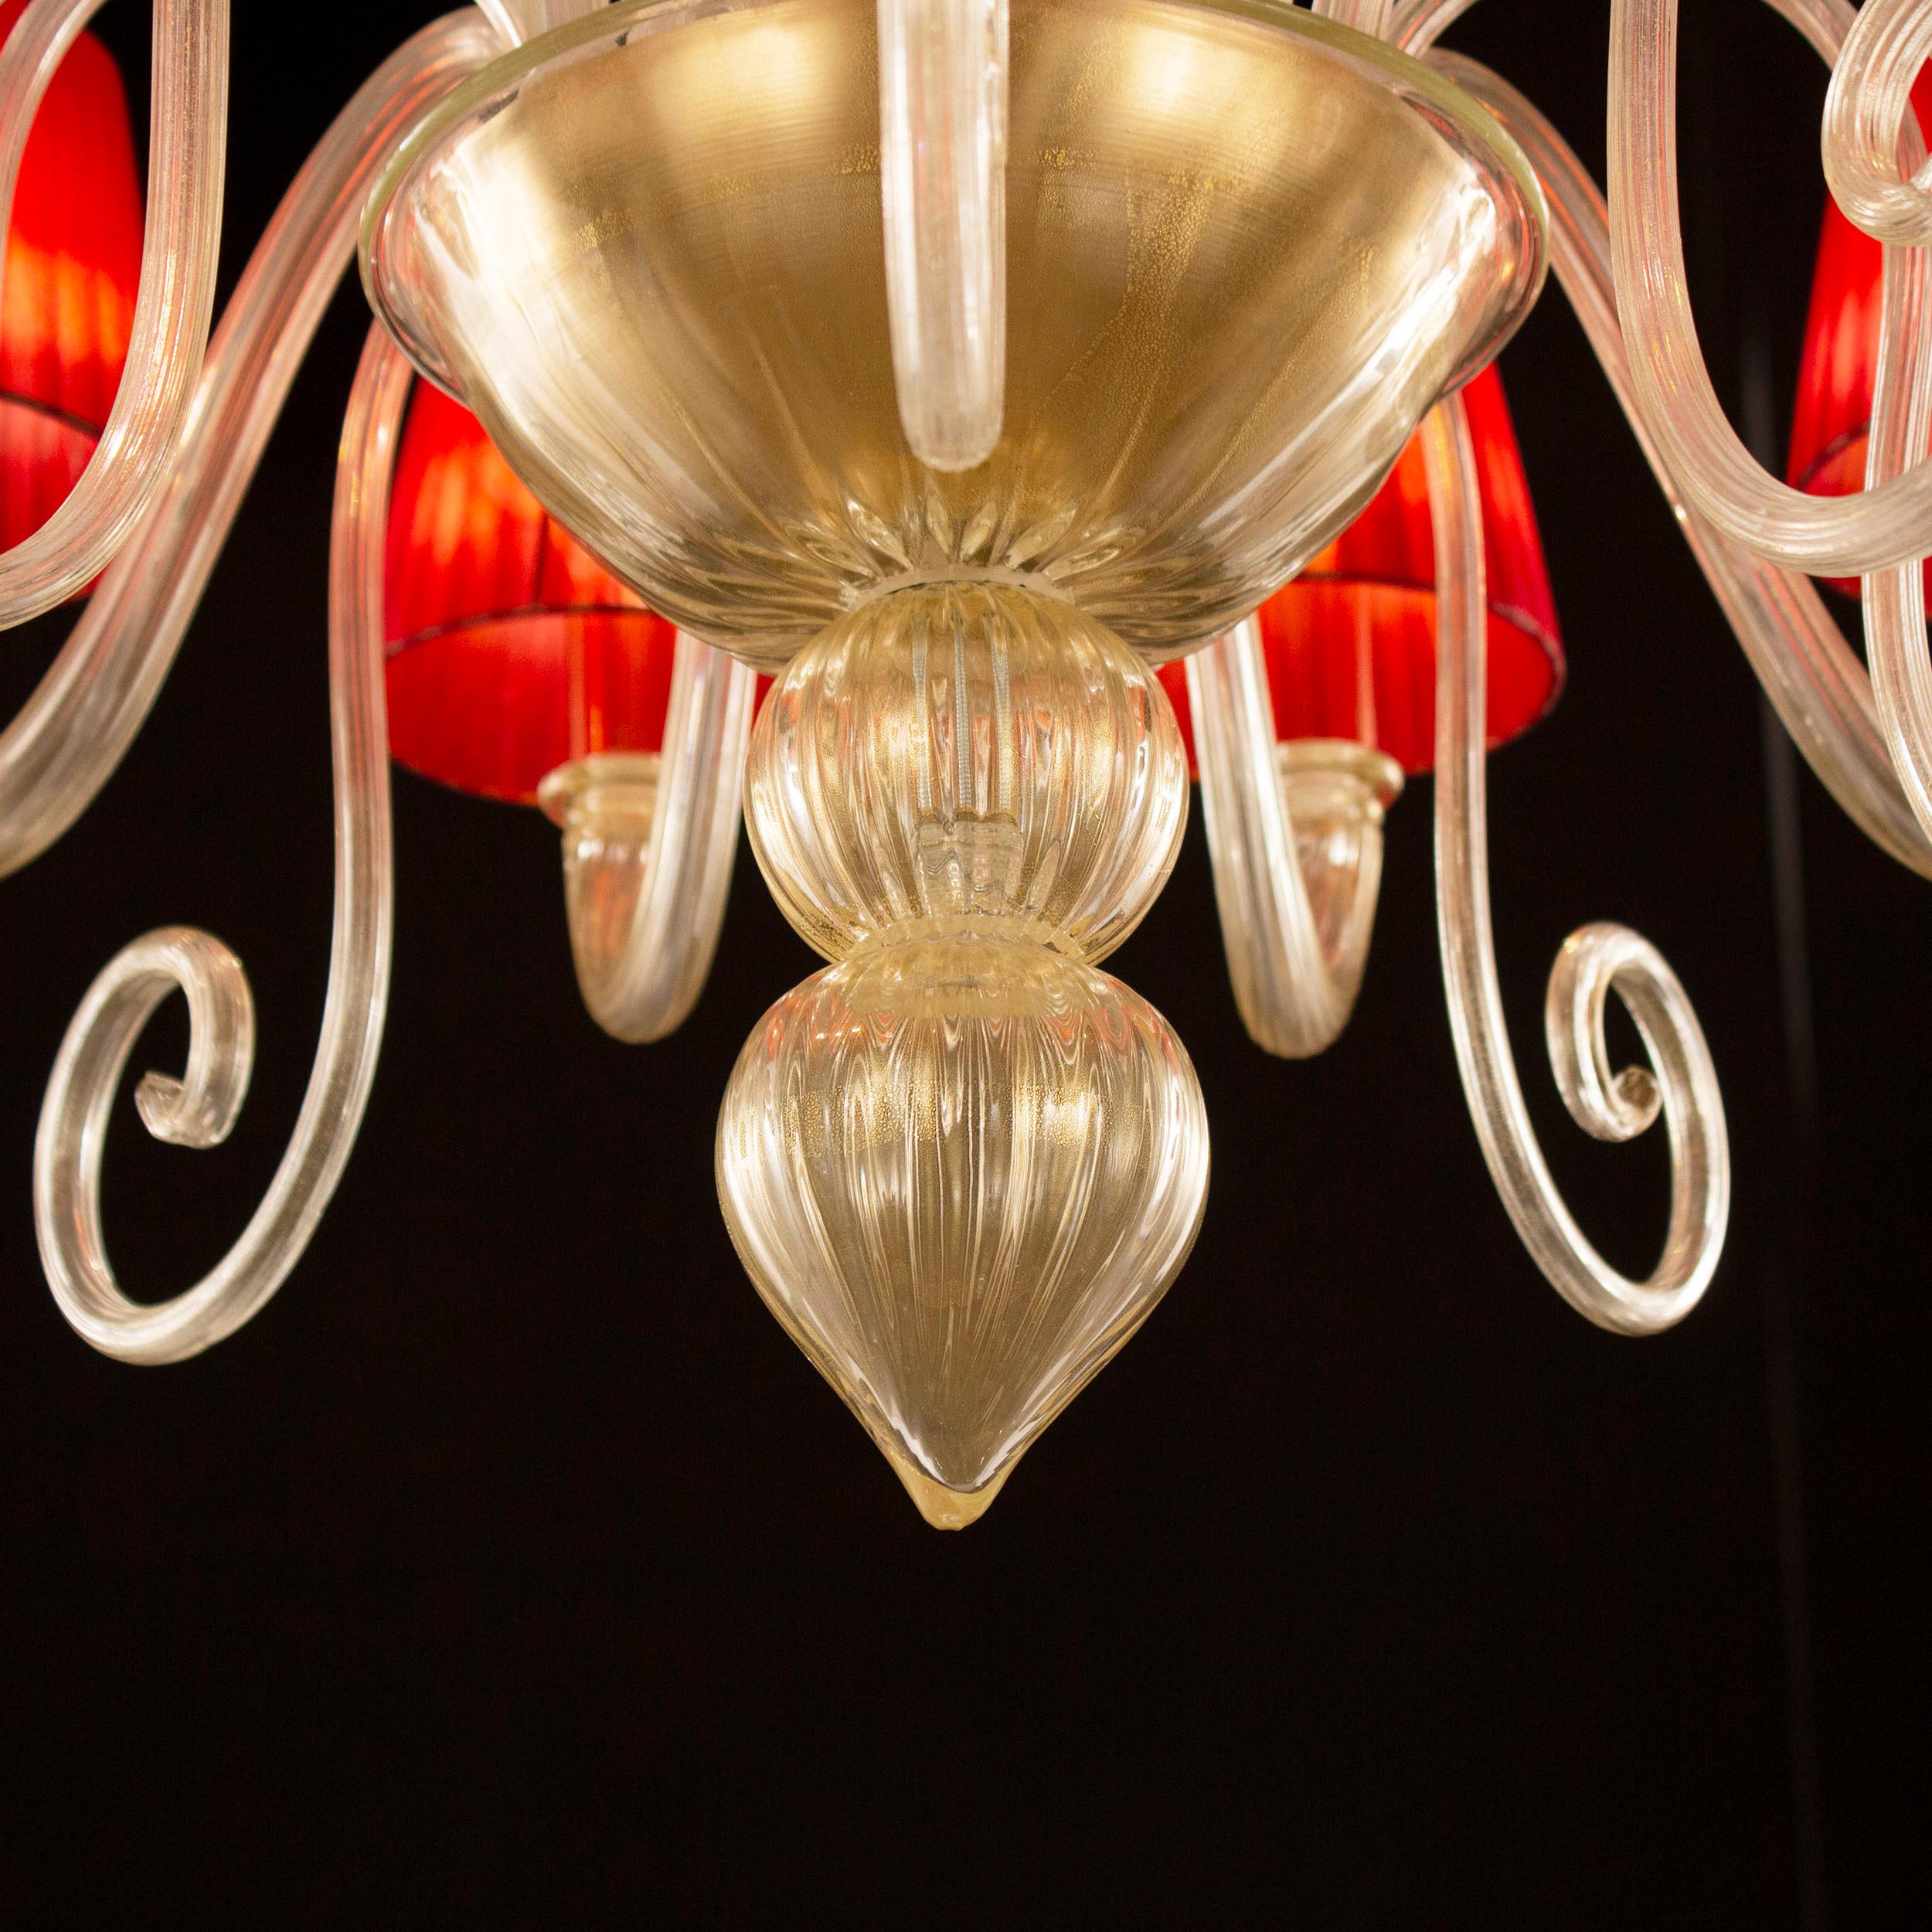 Italian Artistic Chandelier 8 Arms Golden Leaf Murano Glass and Lampshades by Multiforme For Sale